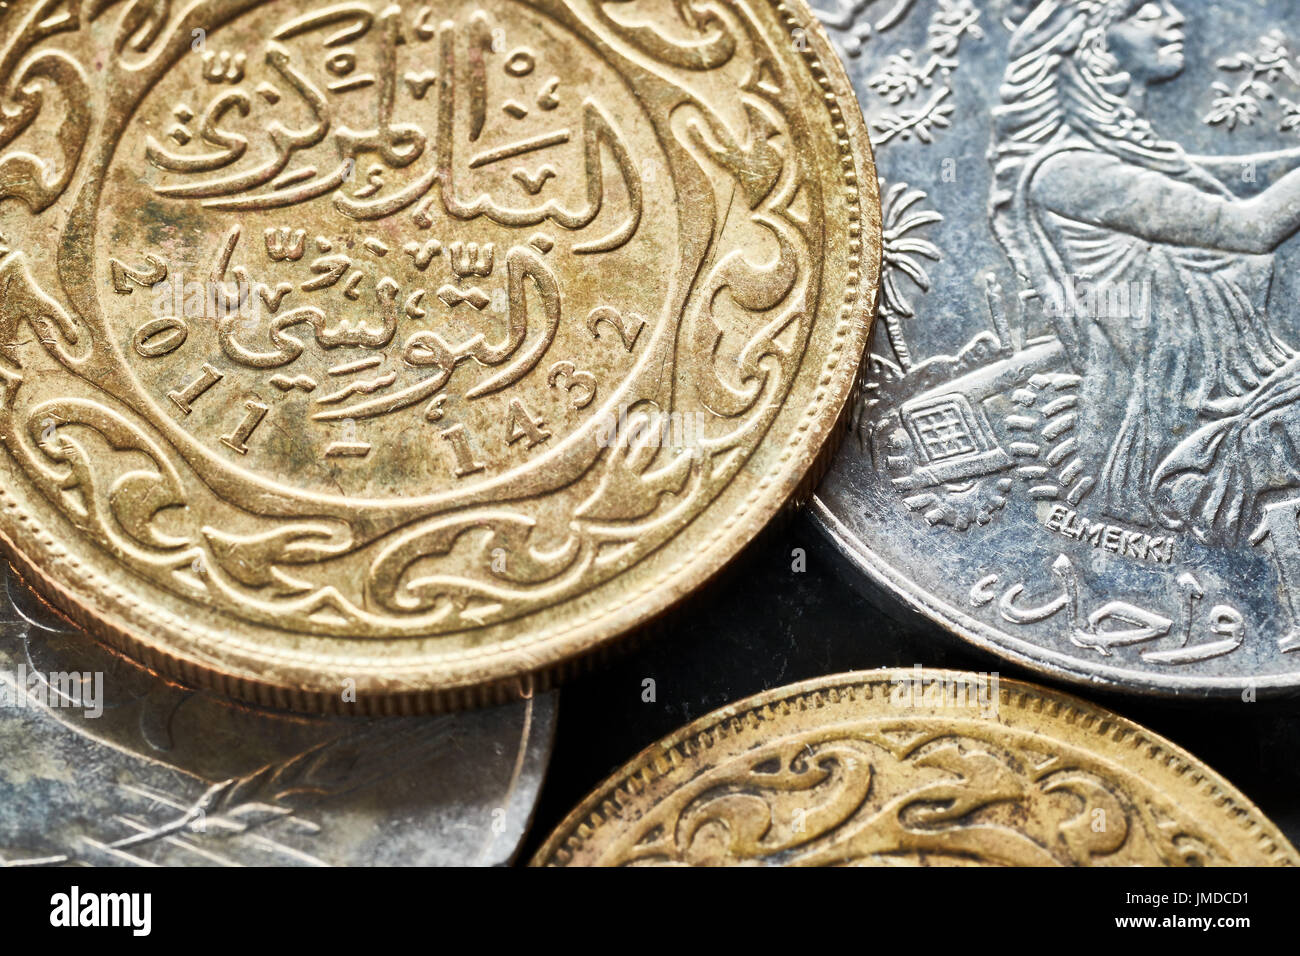 Close up picture of Tunisian dinars, shallow depth of field. Stock Photo